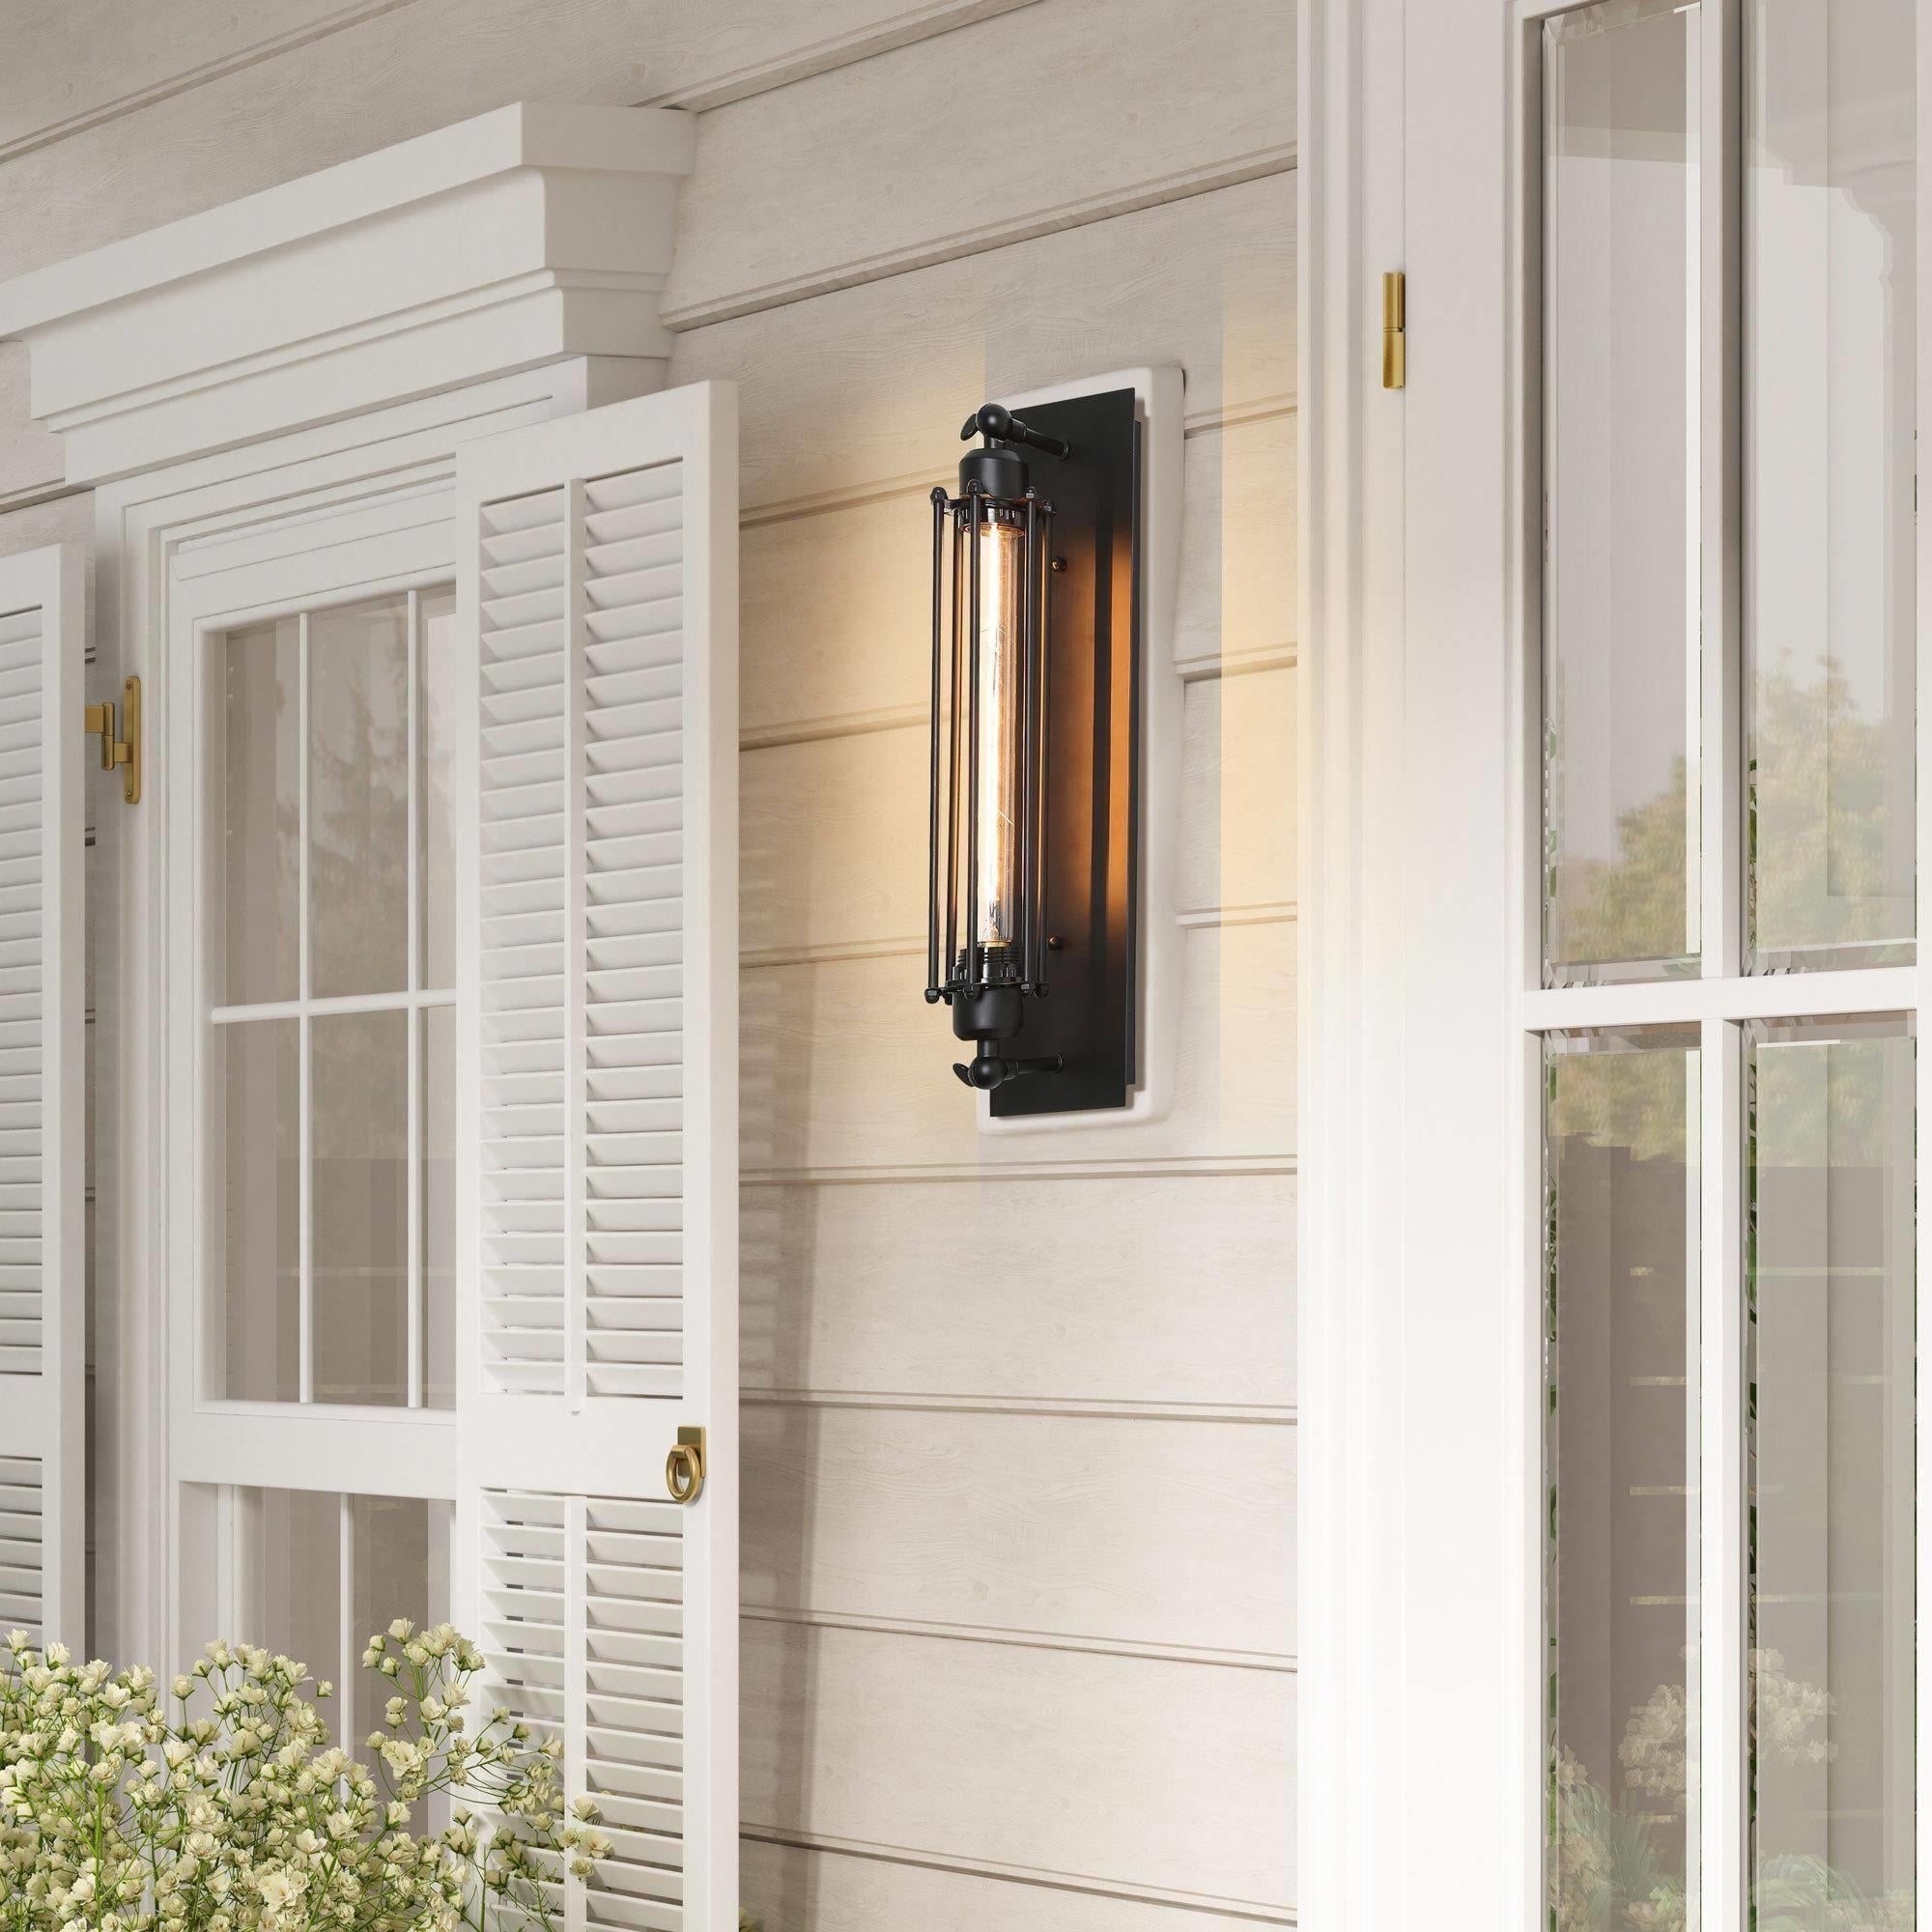 Design Classics Lighting Contemporary Single Light Sconce with Pull Chain Switch and Glass Shade - Bronze Finish 203-78